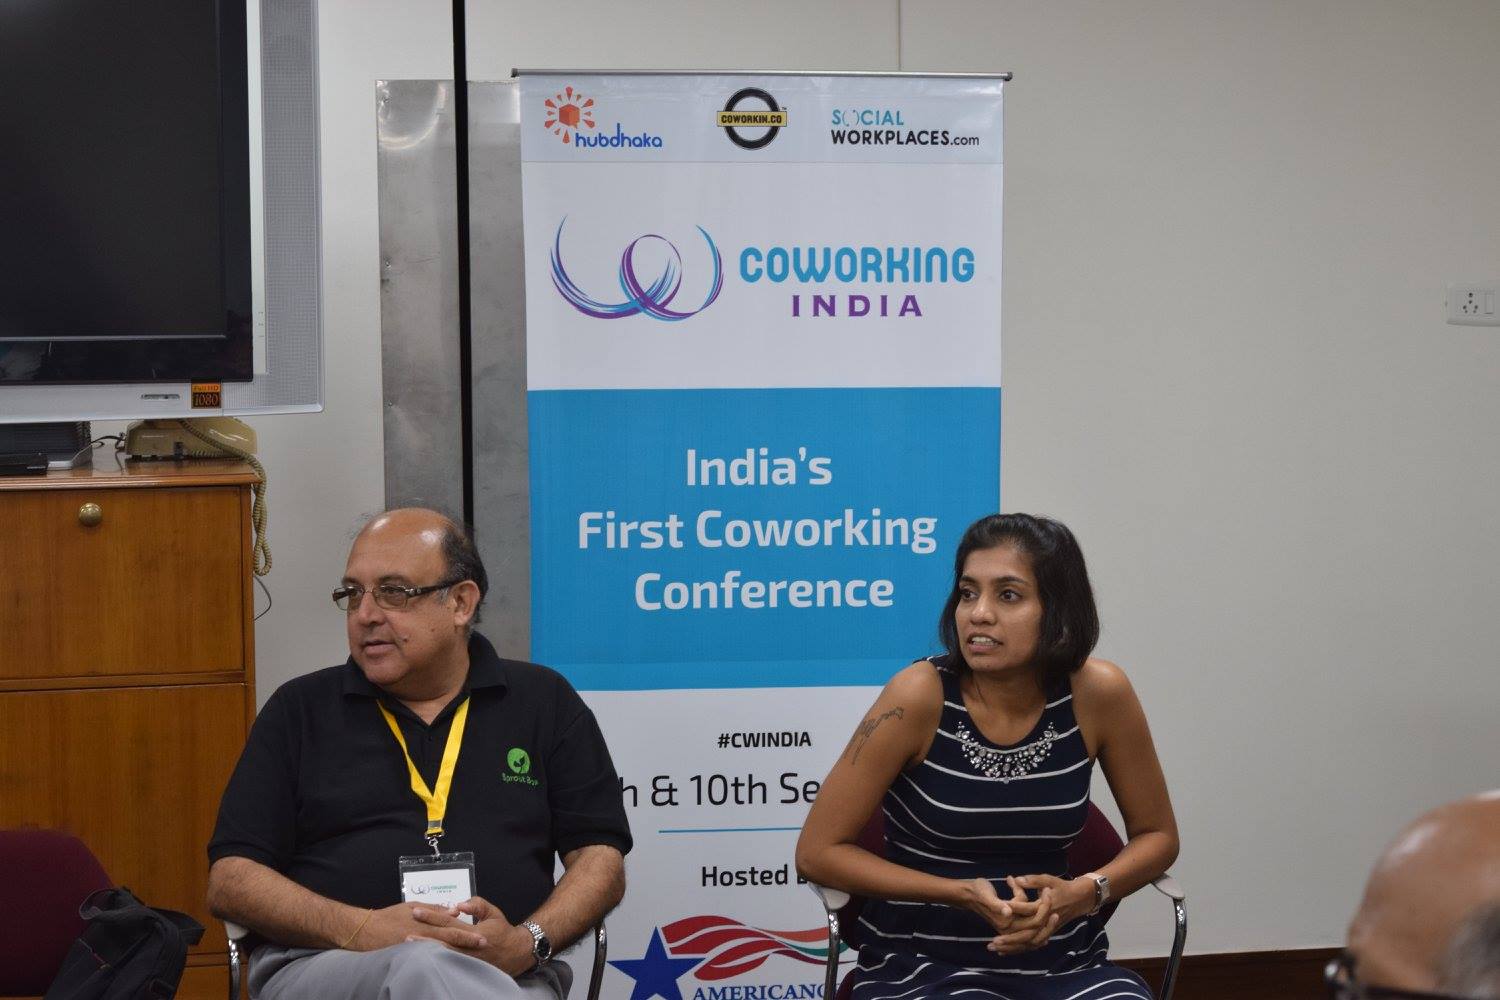 Coworking India